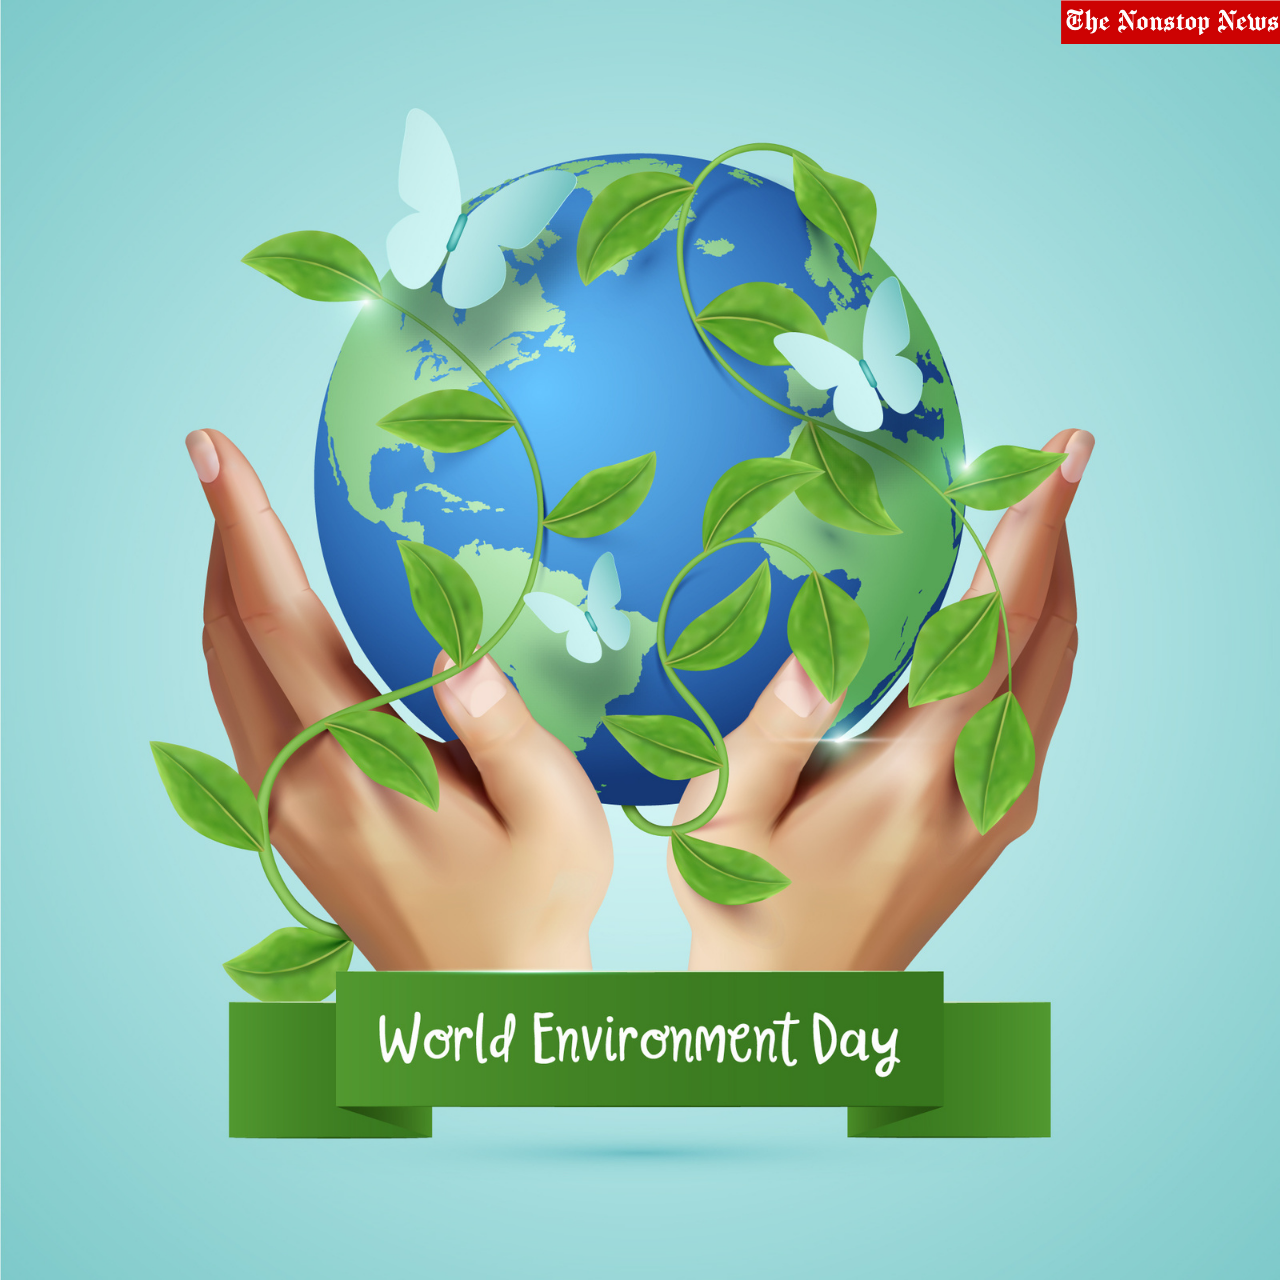 World Environment Day 2022: Current Theme, Wishes, Quotes, Greetings, HD Images, Posters, Slogans To Share